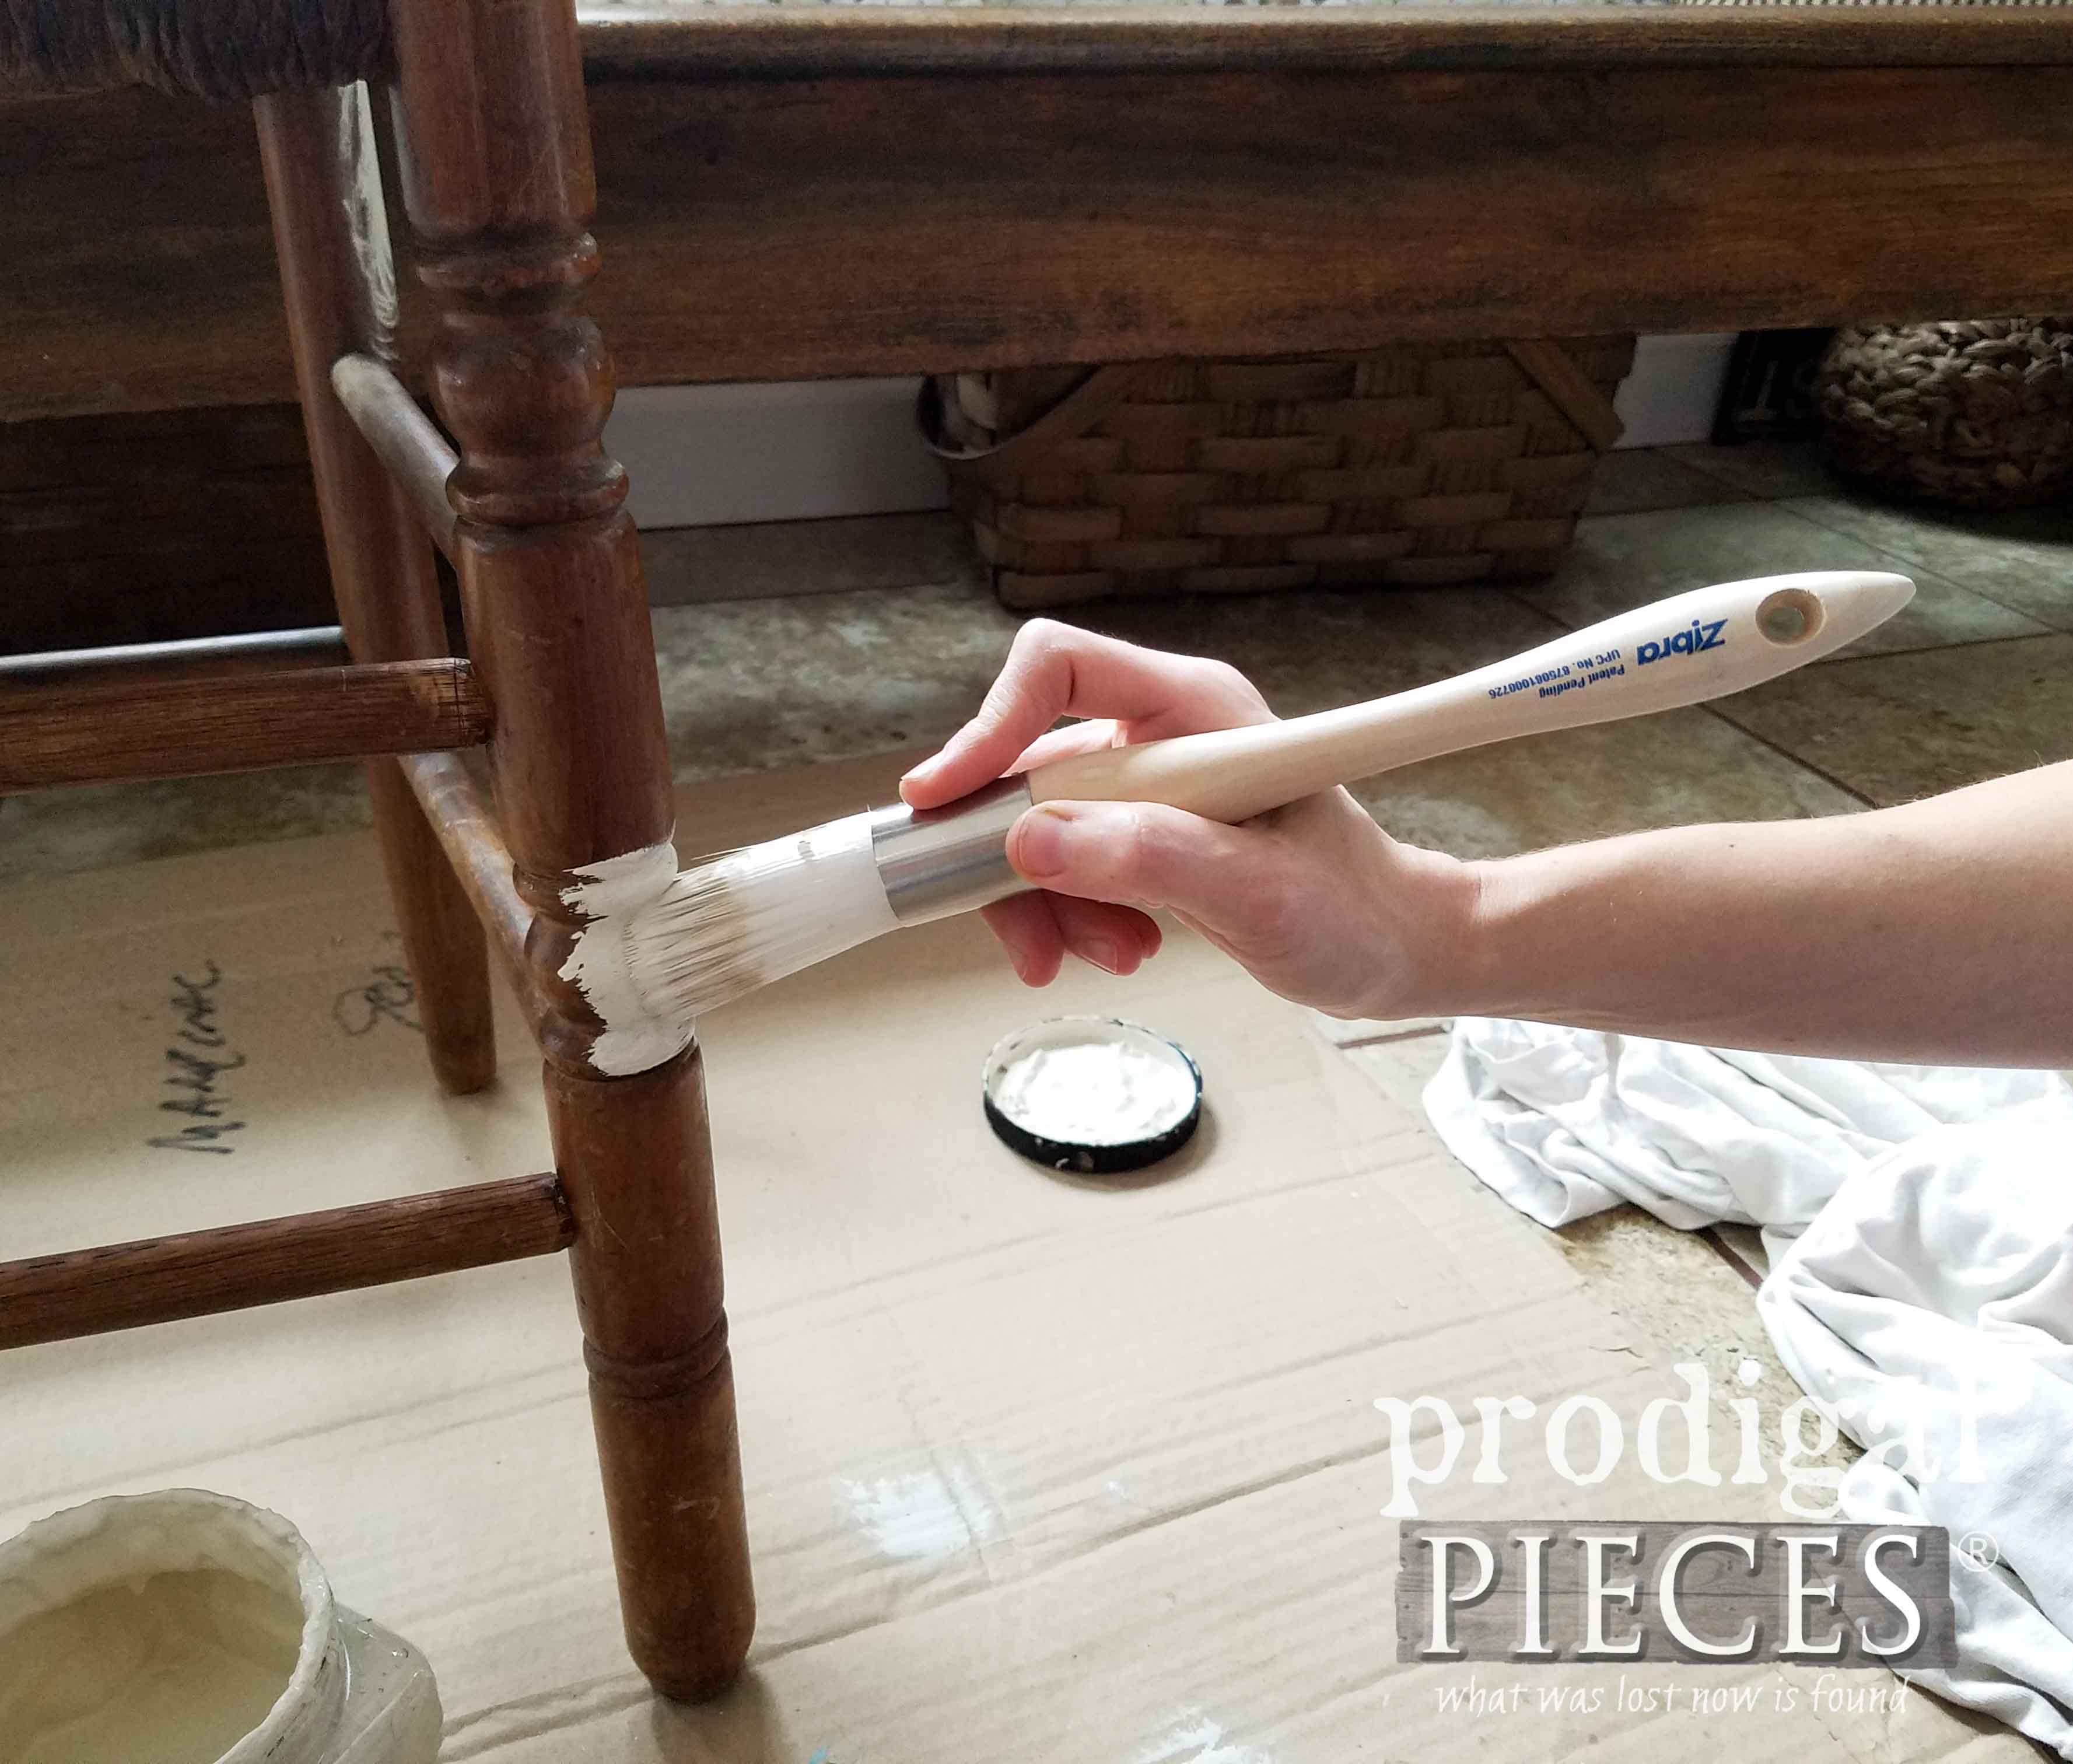 Tackle Turned Legs and Round Surfaces by Prodigal Pieces | prodigalpieces.com